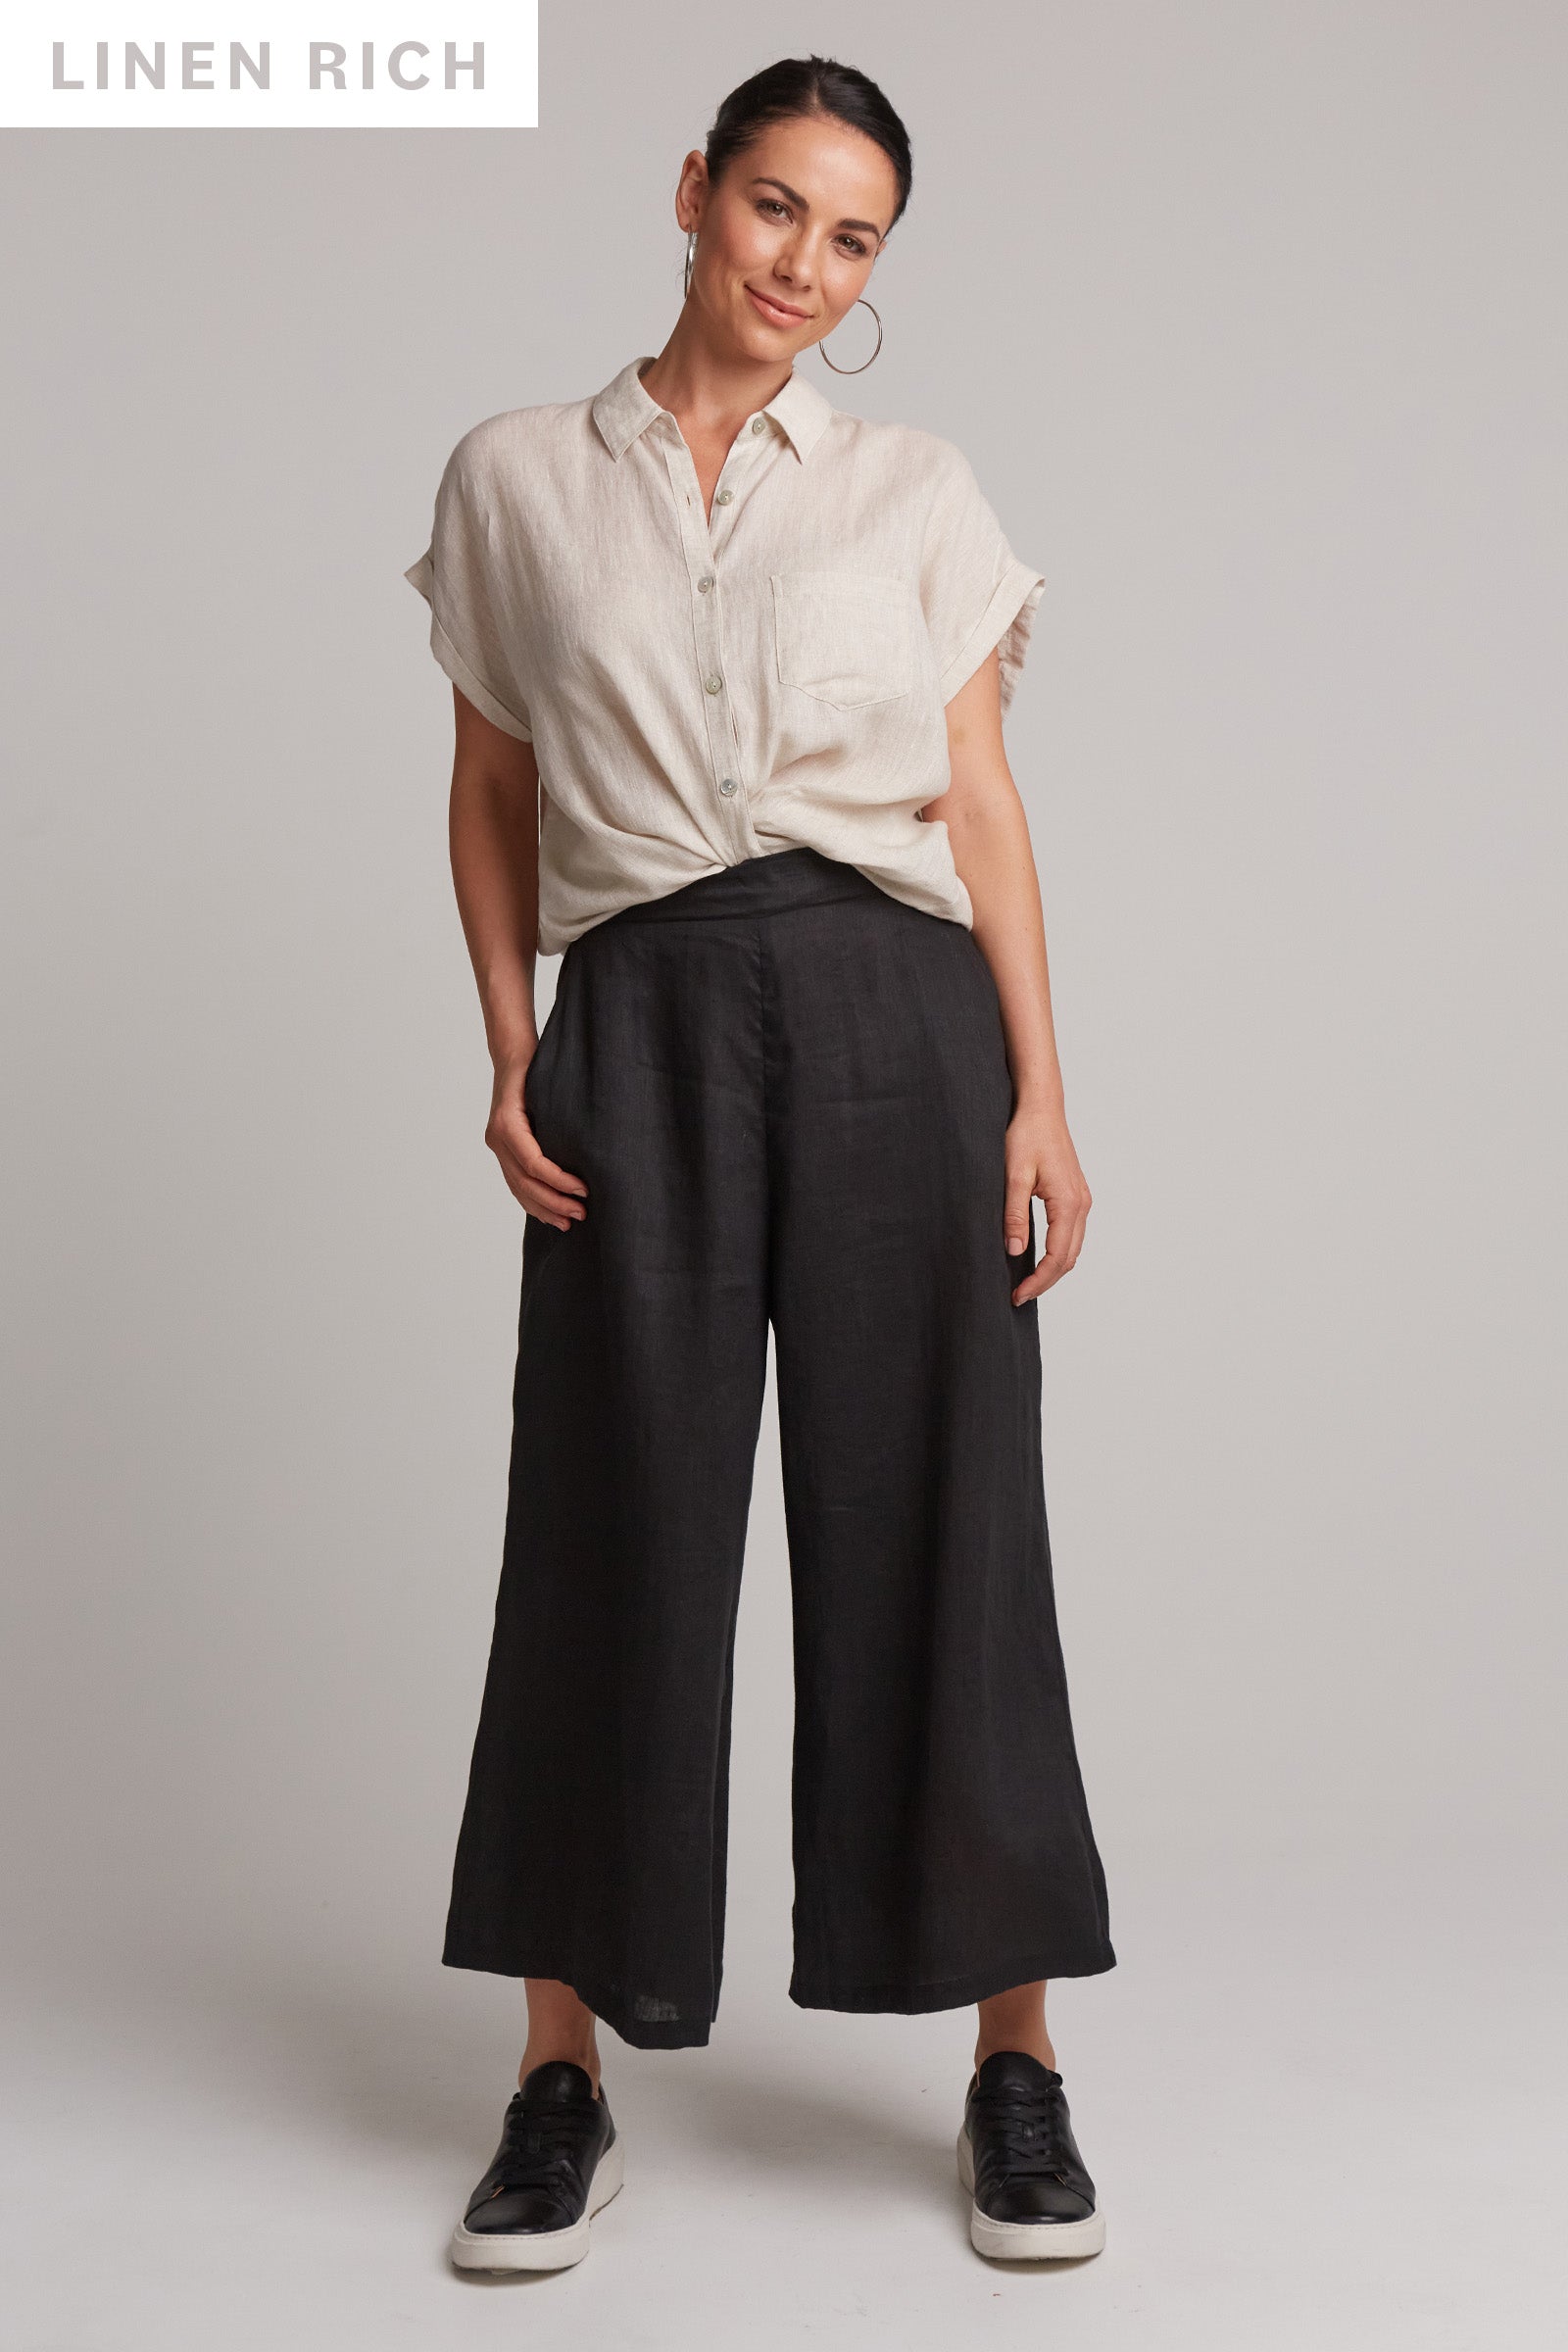 Studio Crop Pant - Ebony - eb&ive Clothing - Pant Relaxed Crop Linen